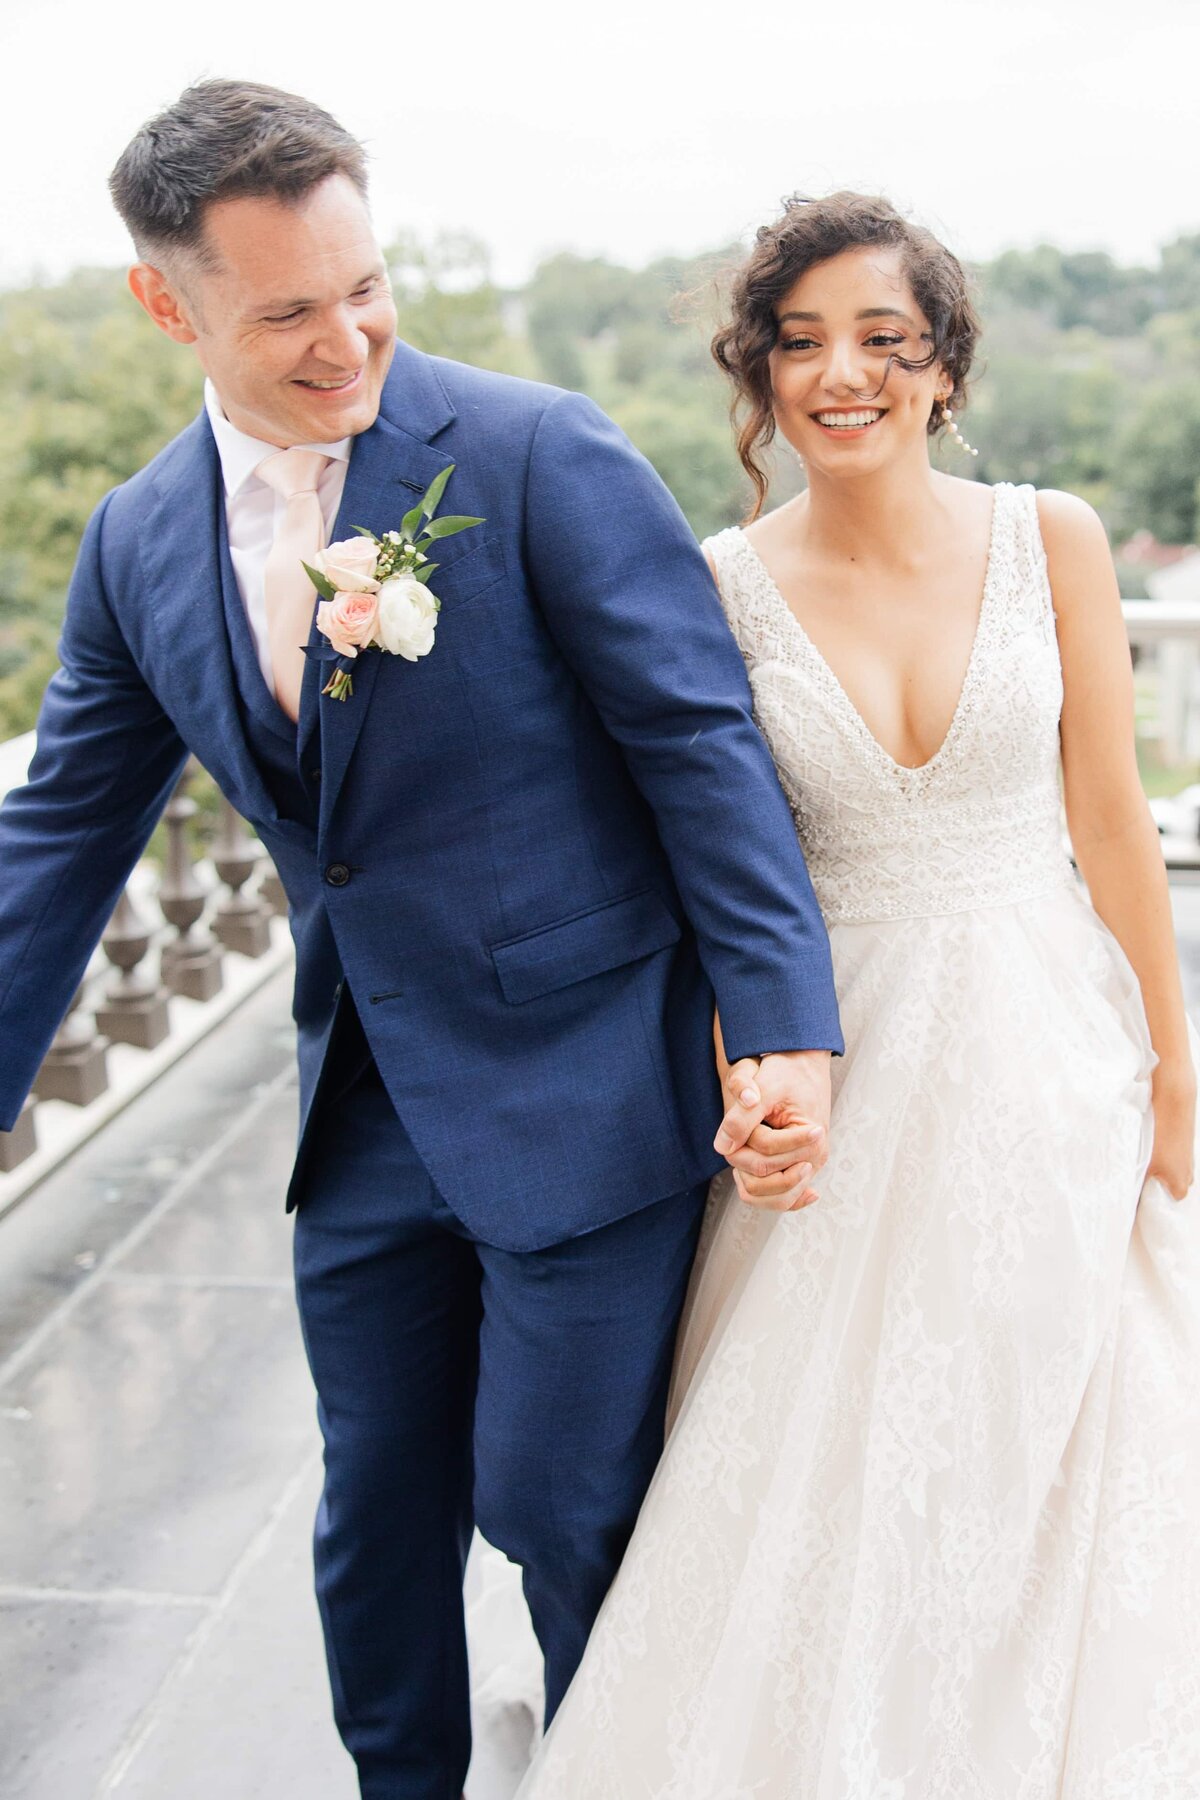 A joyful bride and groom holding hands and walking, the bride in a lace gown coordinated by a wedding planner in Des Moines, with the groom in a blue suit and pink tie.